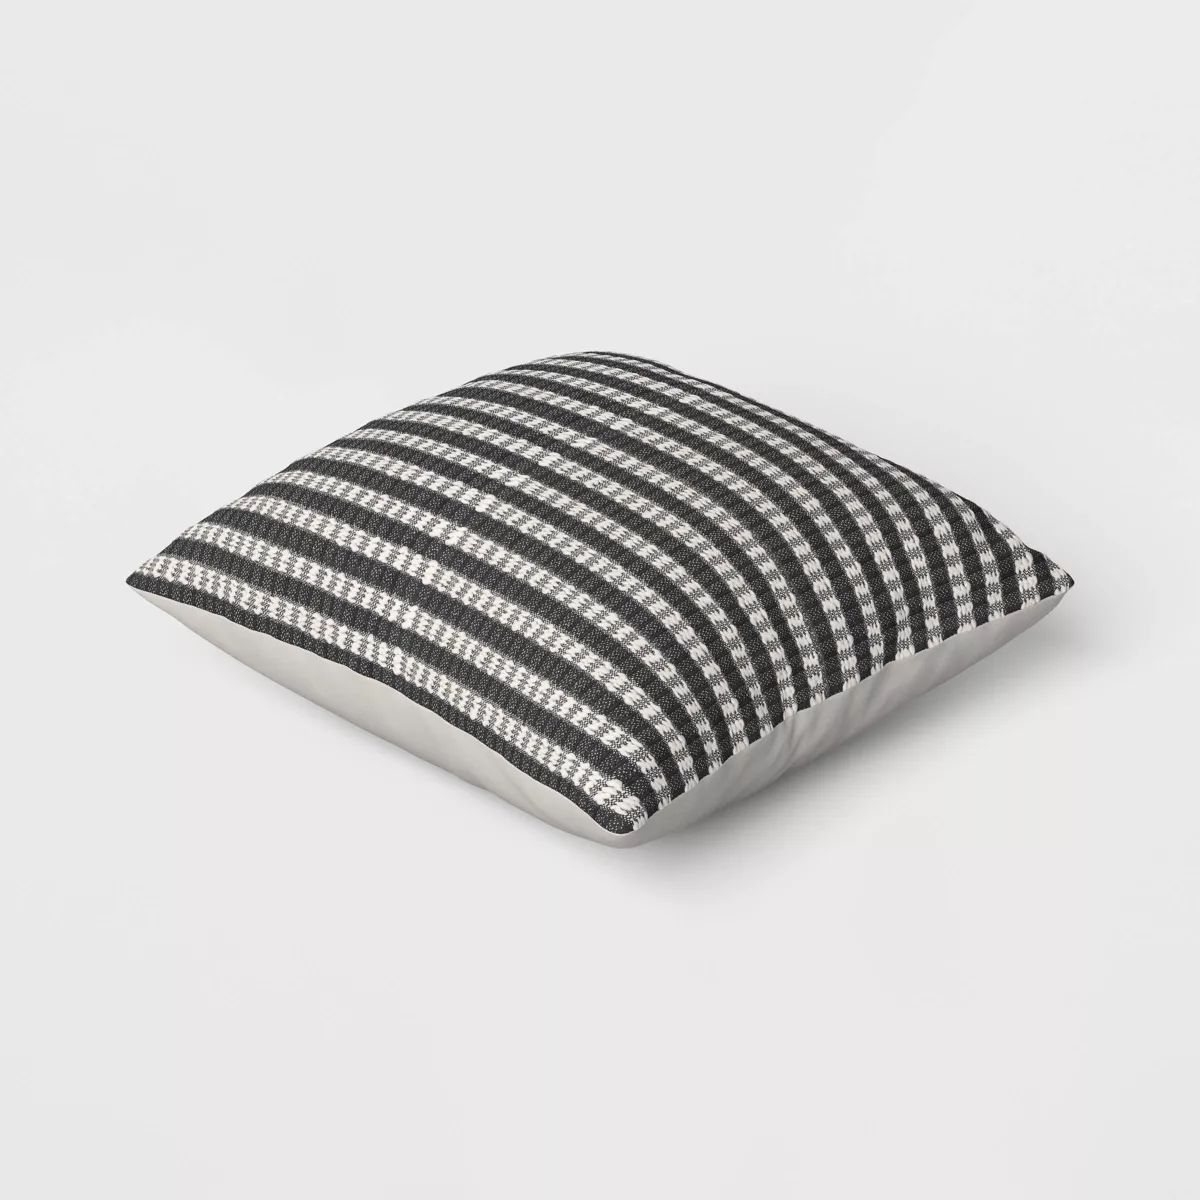 18"x18" Stitched Stripe Square Outdoor Throw Pillow Assorted Grays - Threshold™ | Target